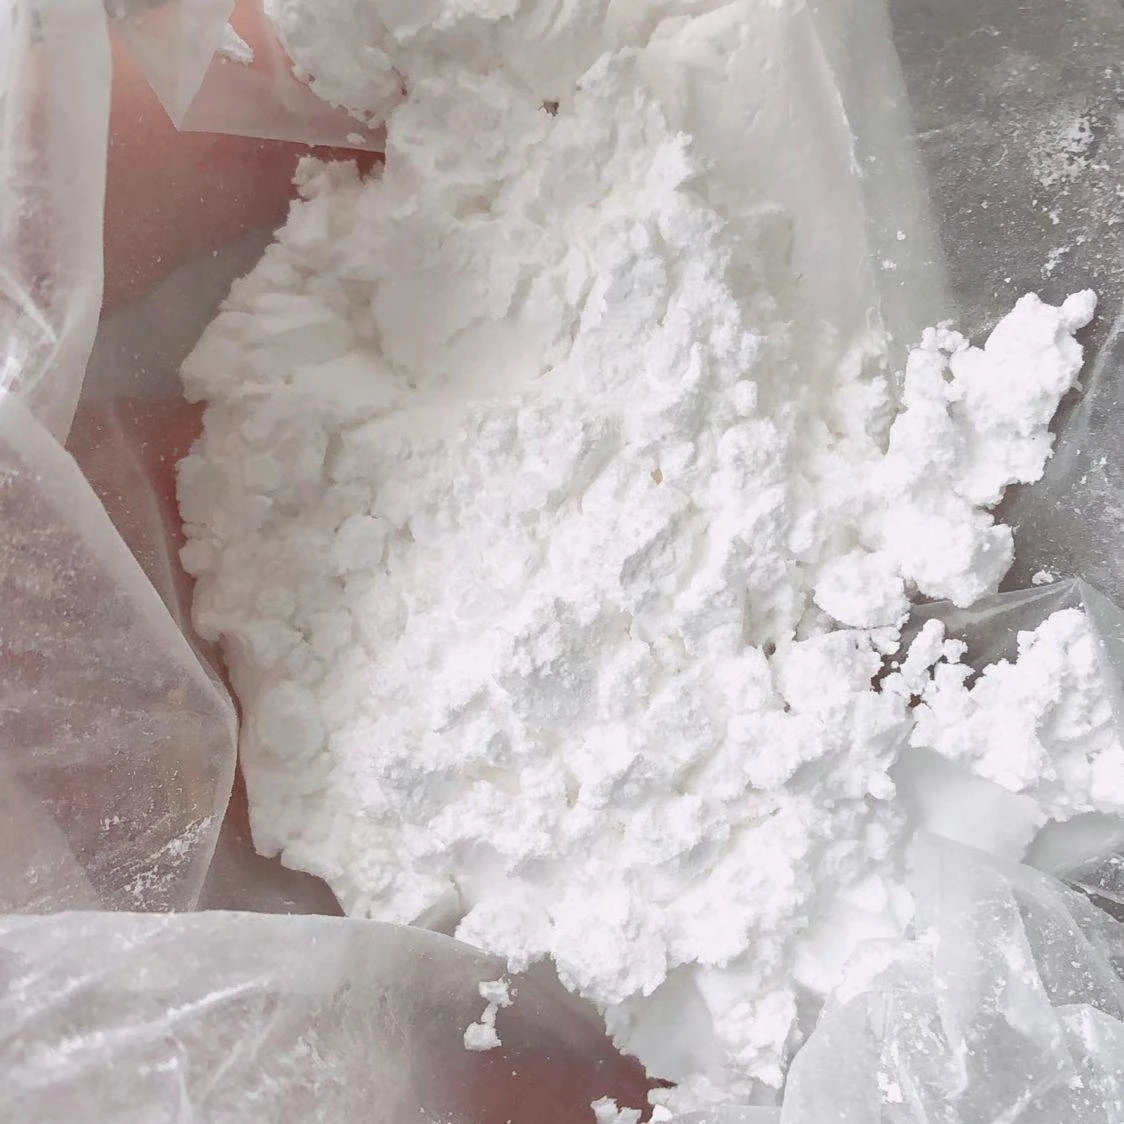 Industrial Grade Lithium Carbonate with 99% High Purity Lithium Carbonate